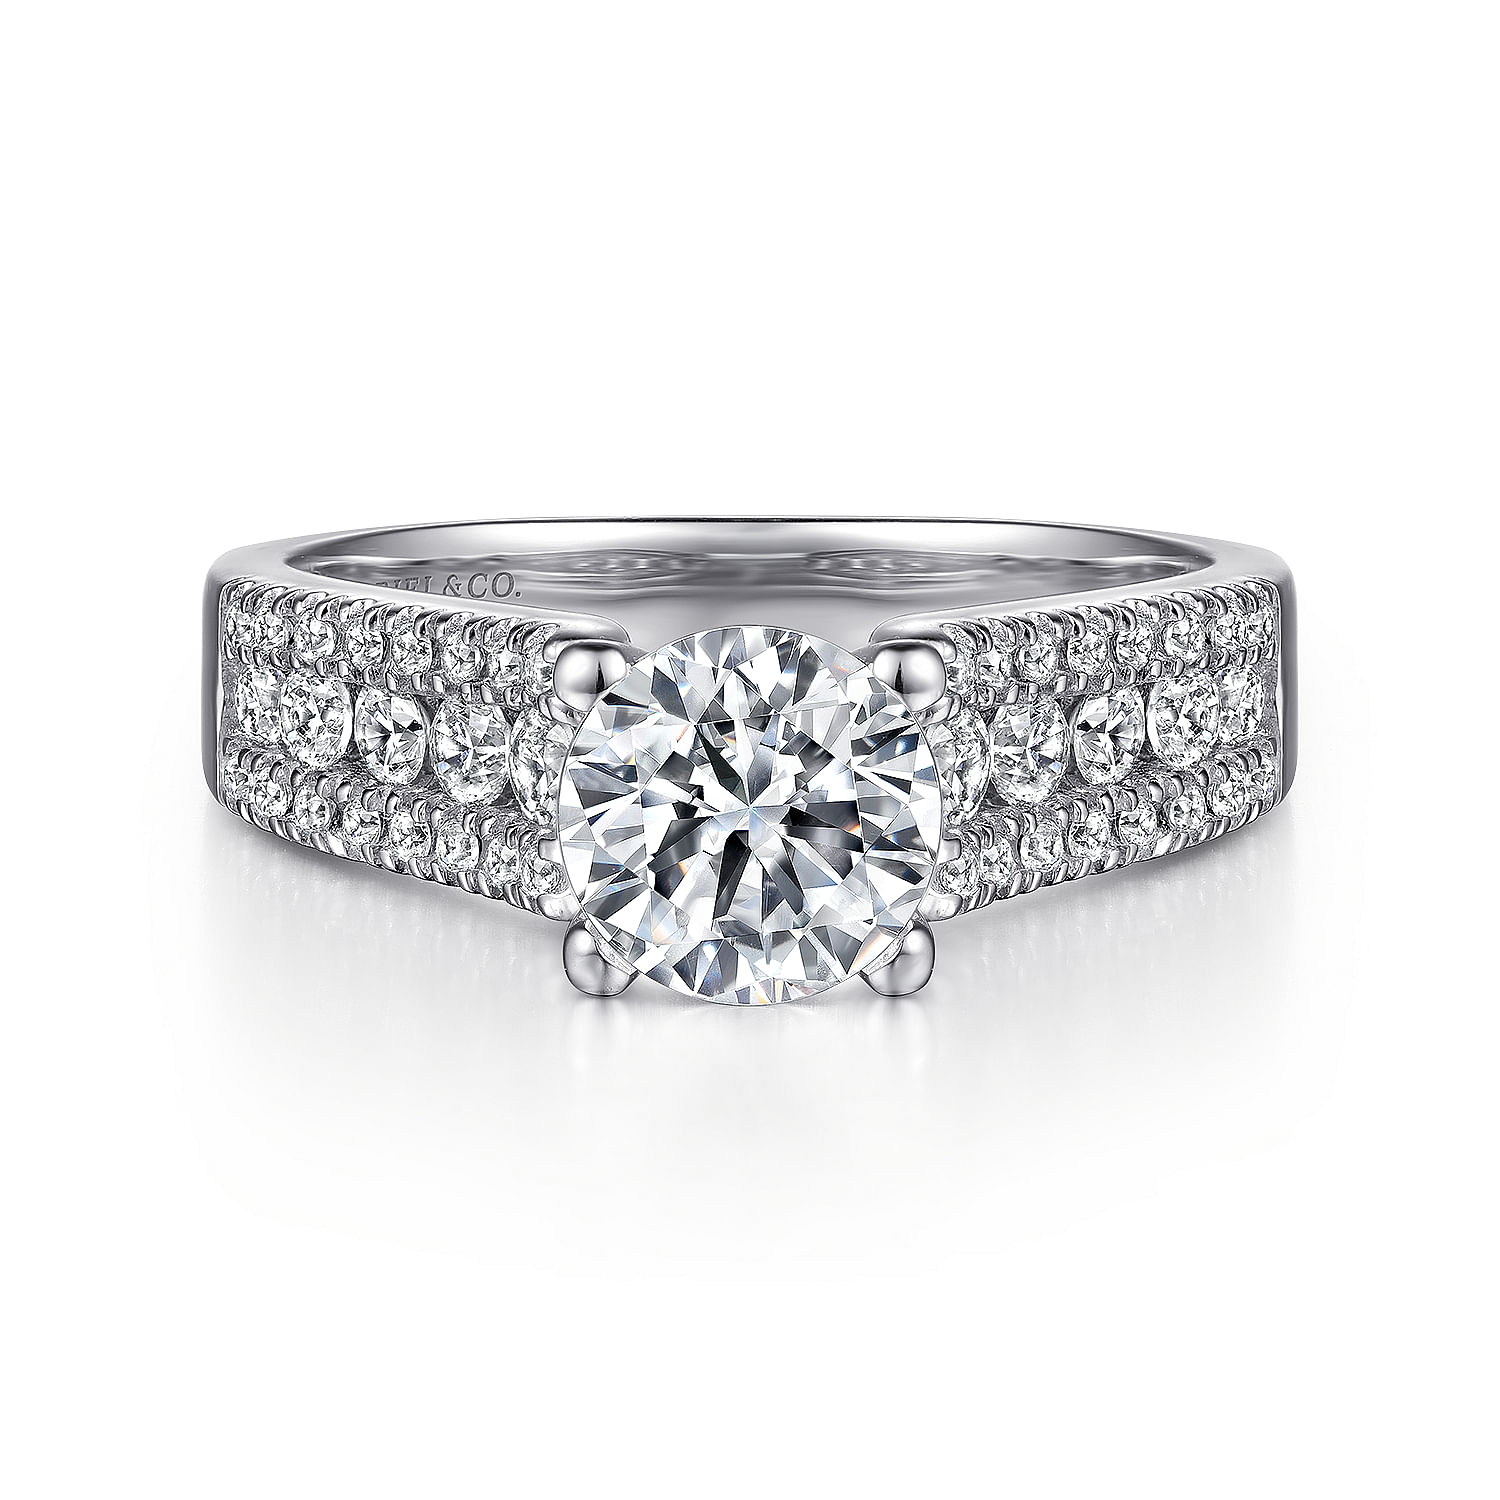 Channing - 14K White Gold Round Wide Band Diamond Engagement Ring